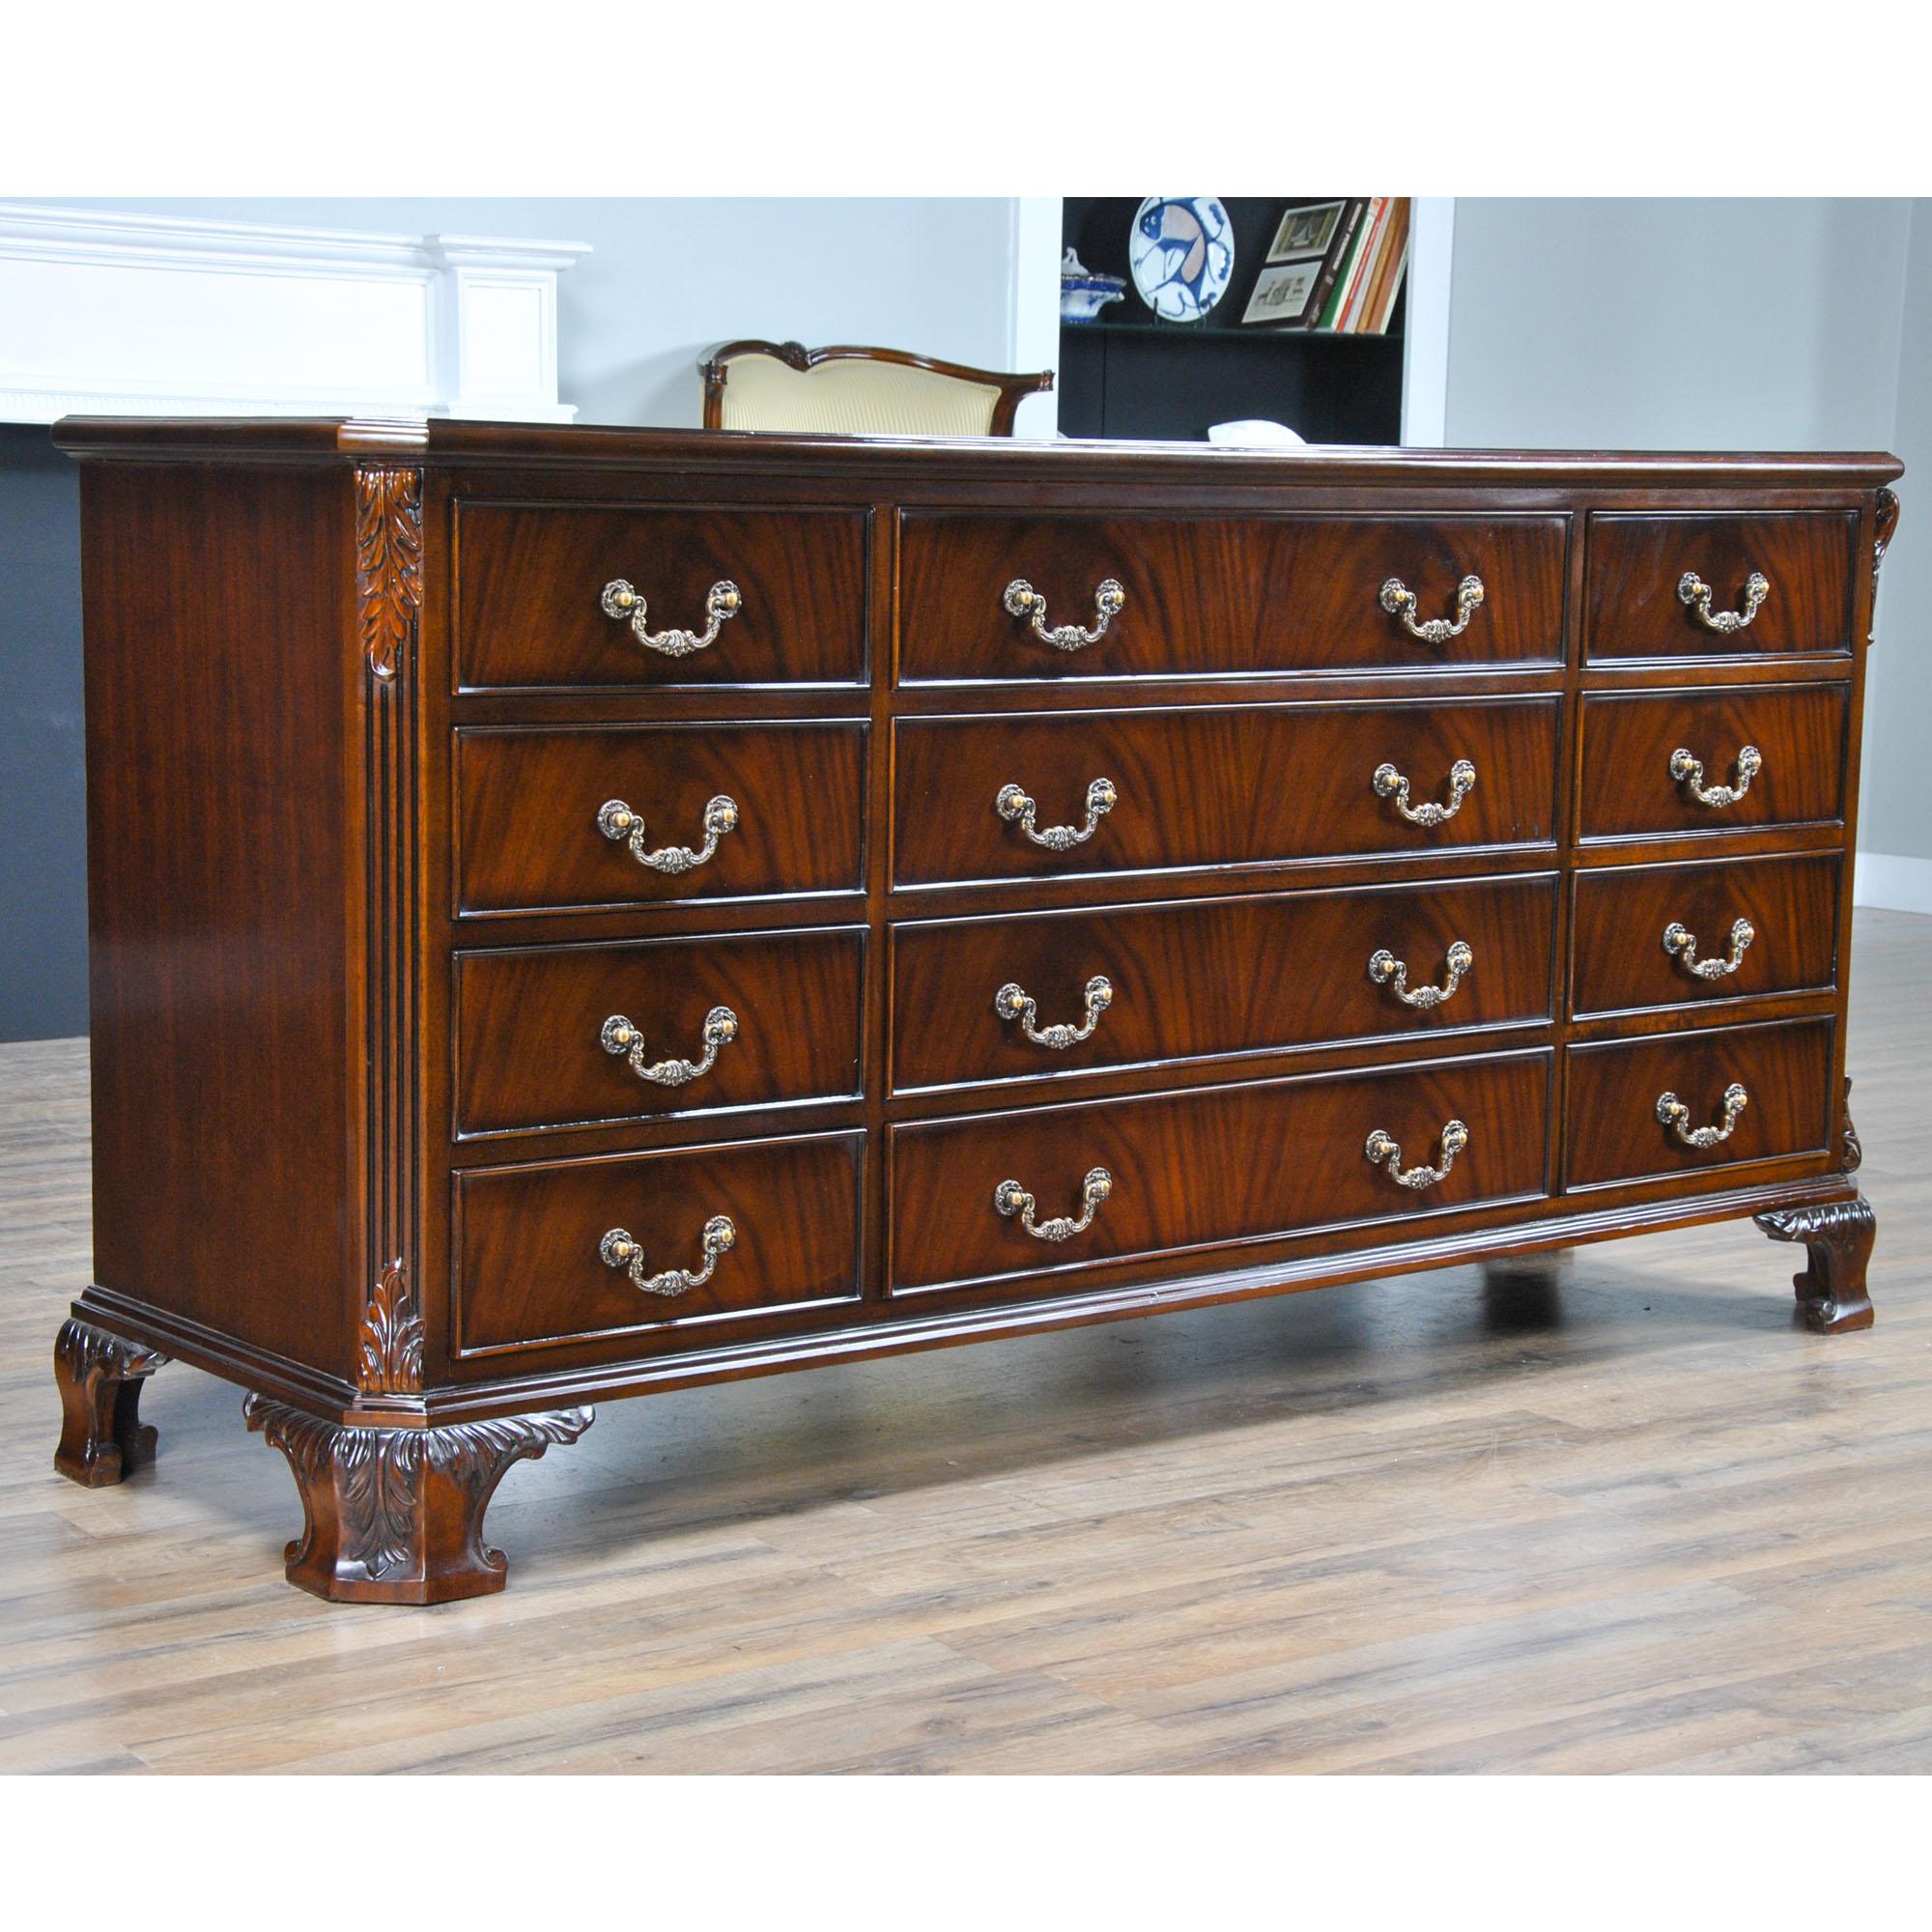 The Chippendale Mahogany Triple Dresser is a classic furniture shape. This chest features three drawers across the top section and then three more rows of three drawers below to give our largest dresser an elegant and traditional furniture